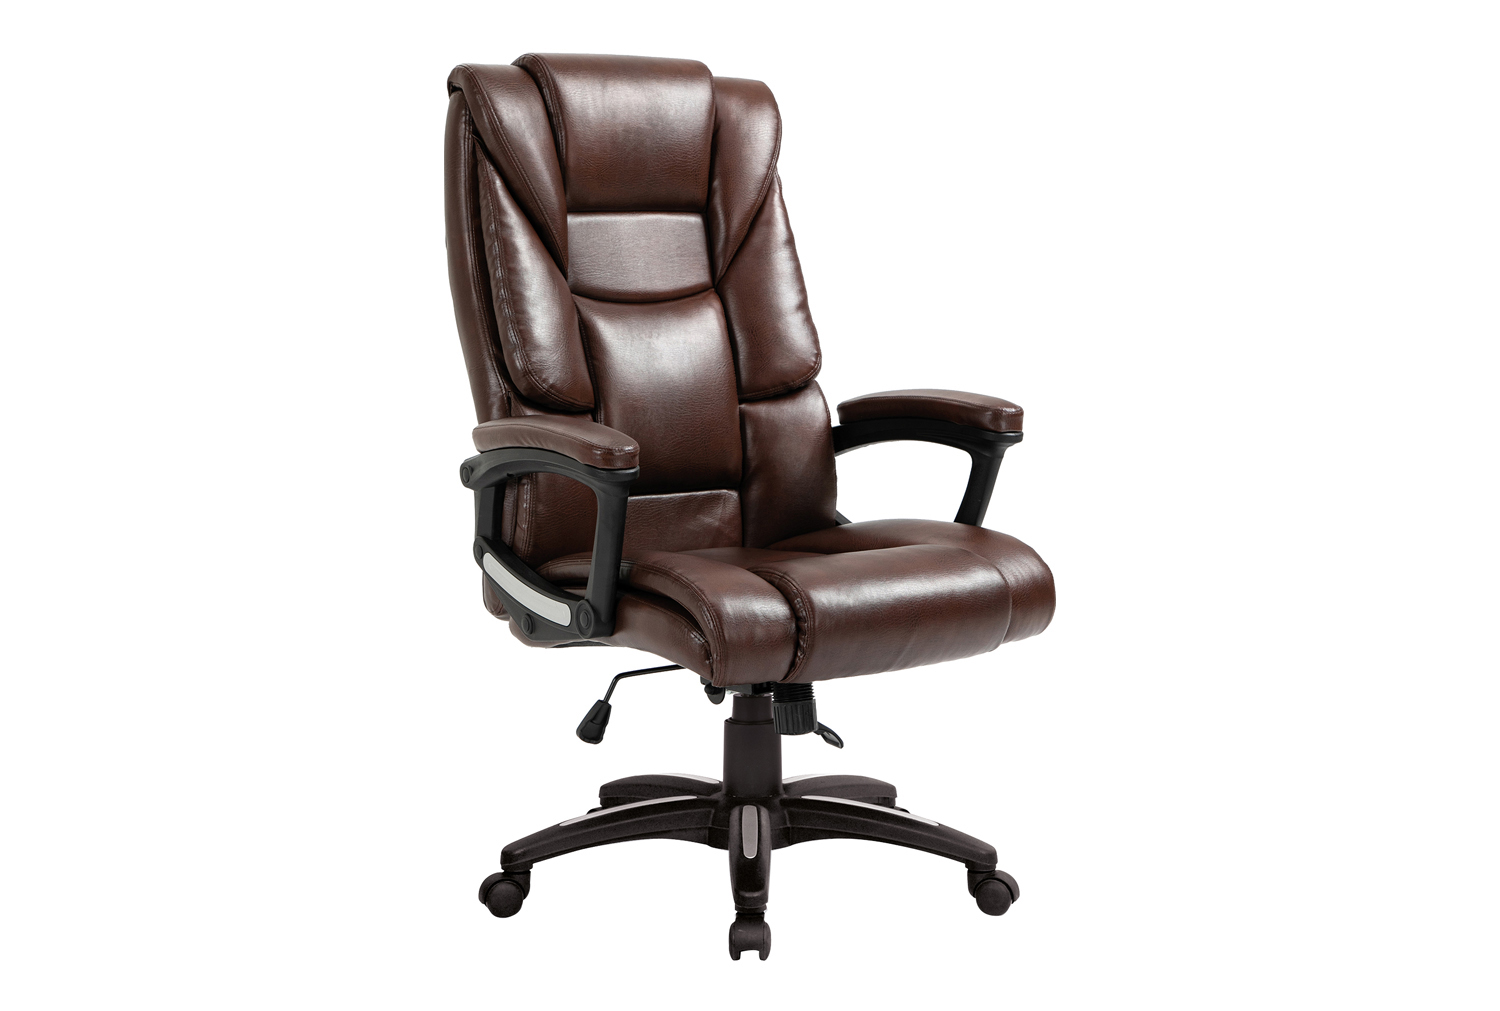 Marley High Back Leather Look Executive Office Chair (Brown), Express Delivery